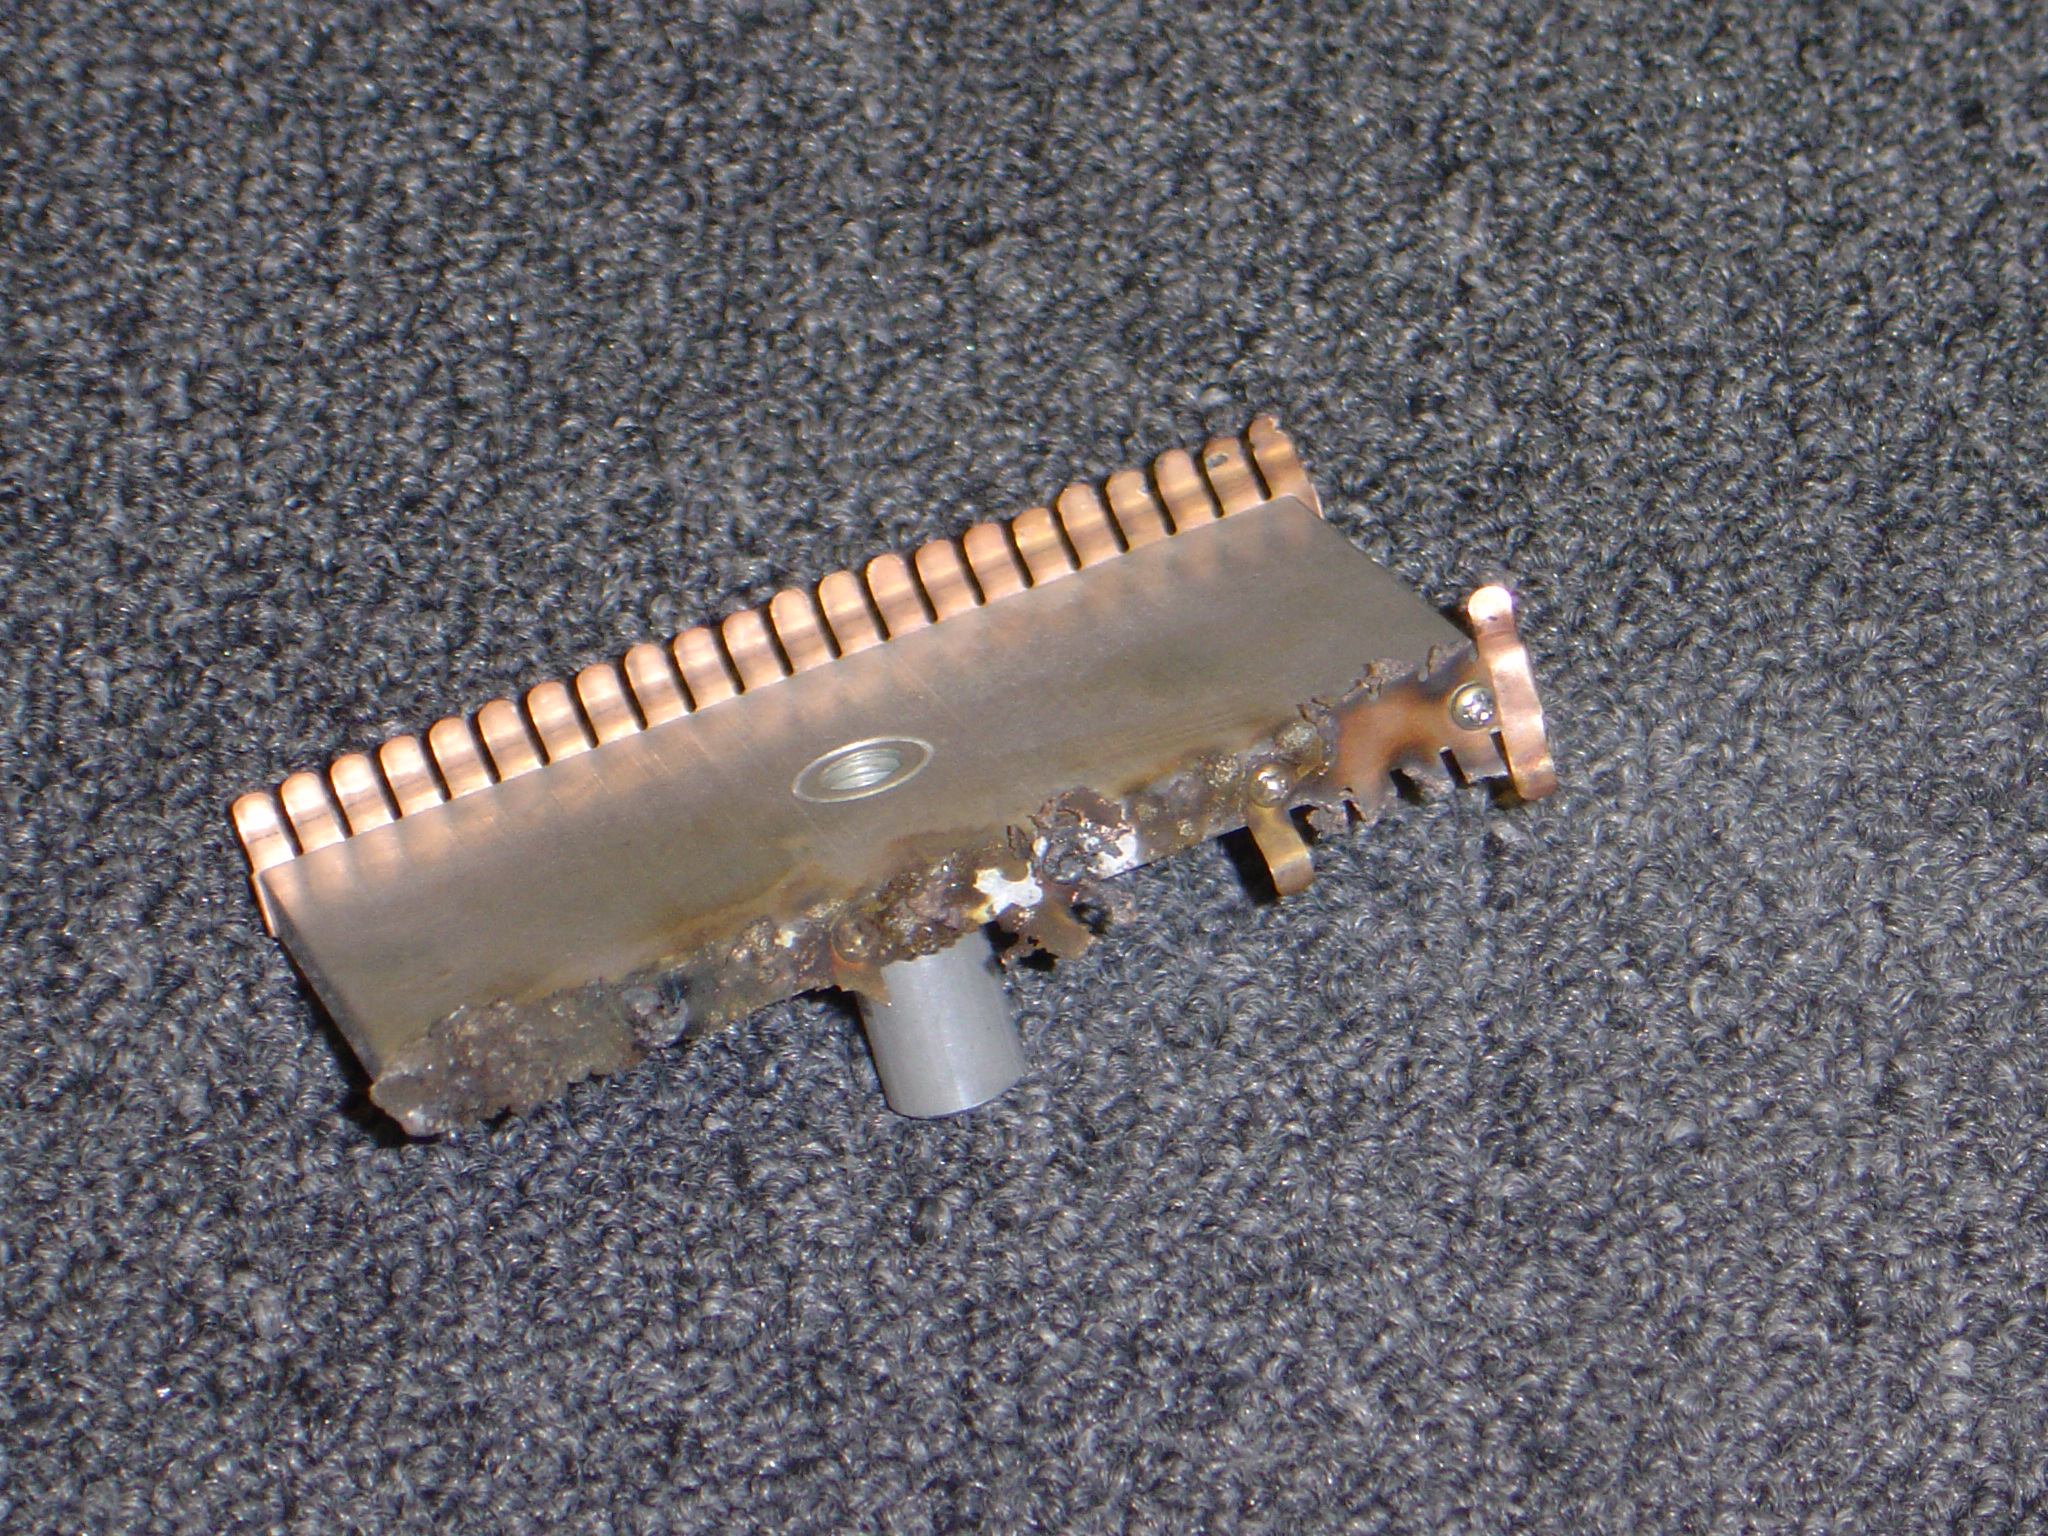 2005 - The burnt out tuning block for the FM Transmitter